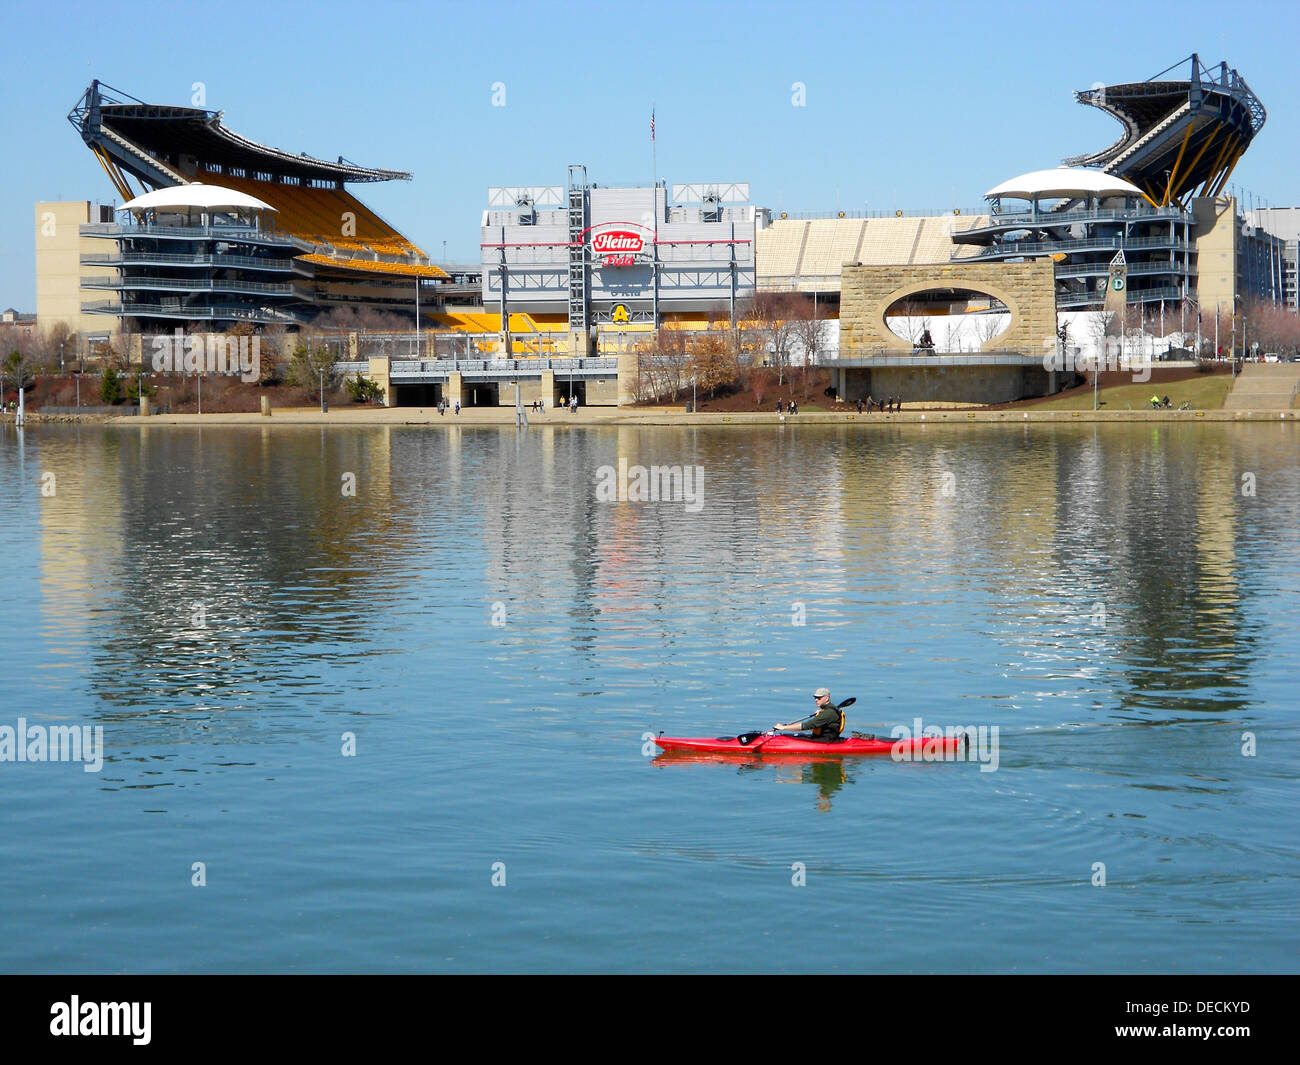 Canoer on the Allegheny River in Pittsburgh near the confluence with the Monongahela River at the Forks of the Ohio (Point State Park). Heinz Stadium (Home of the Steelers) in the background. Stock Photo